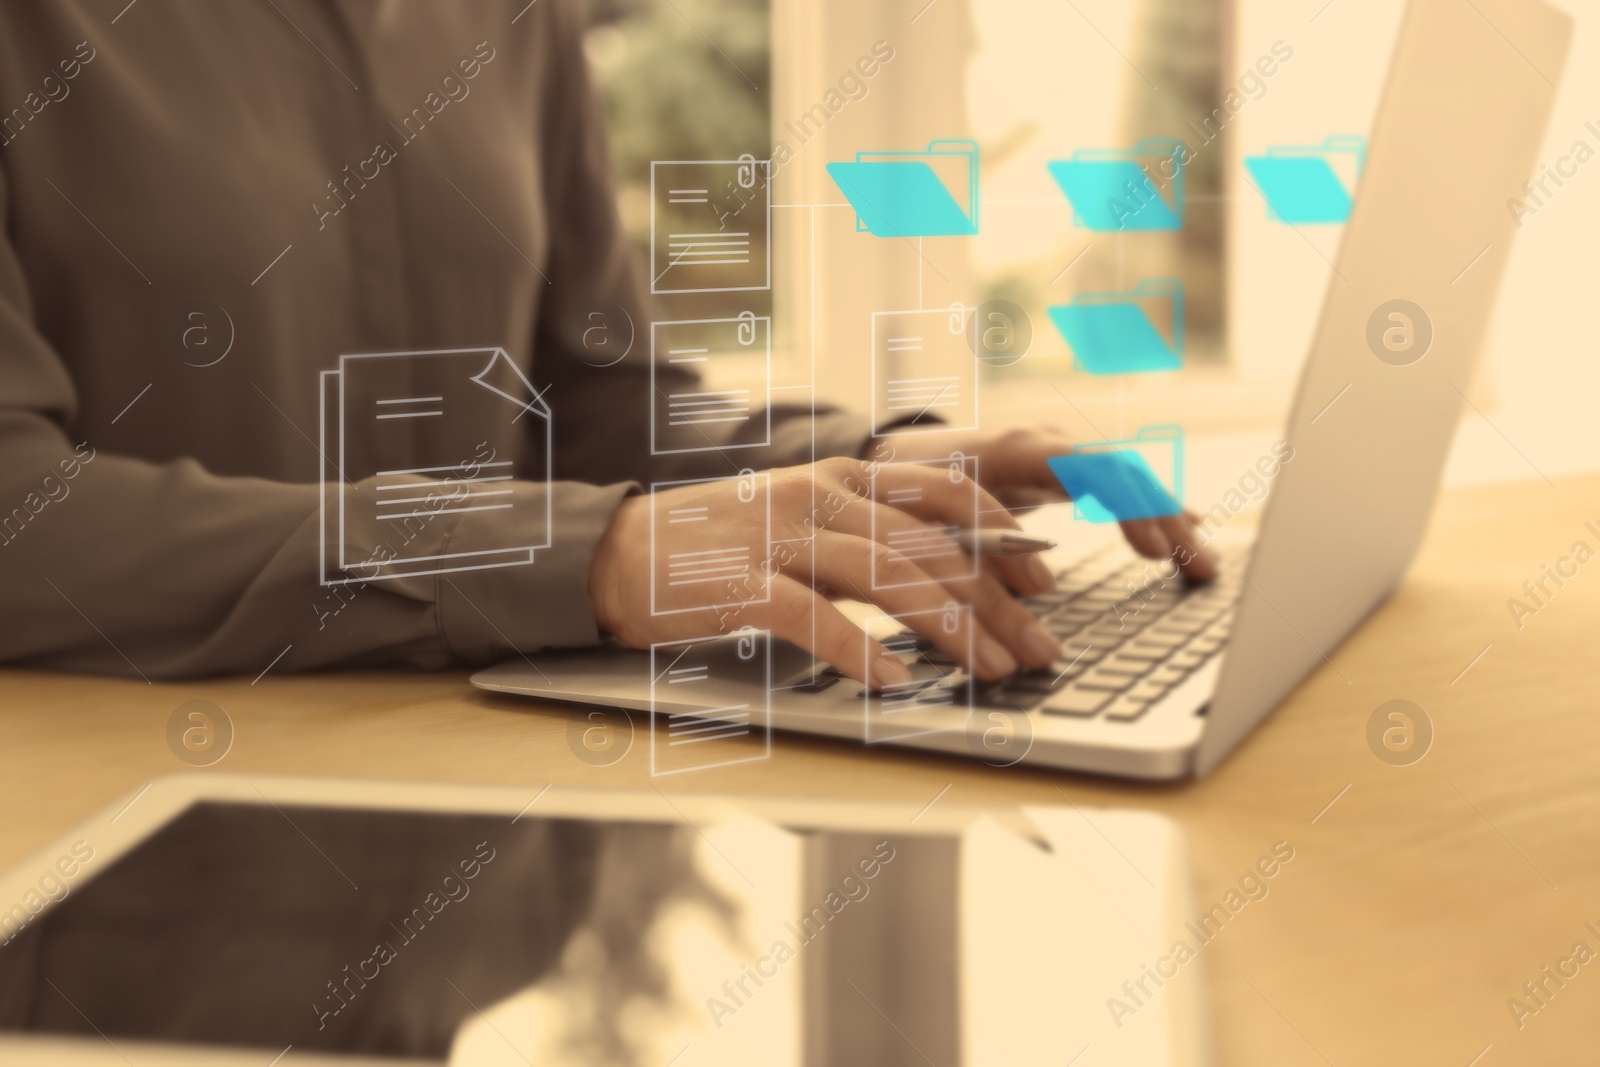 Image of Electronic document management. Woman working on laptop at table, closeup